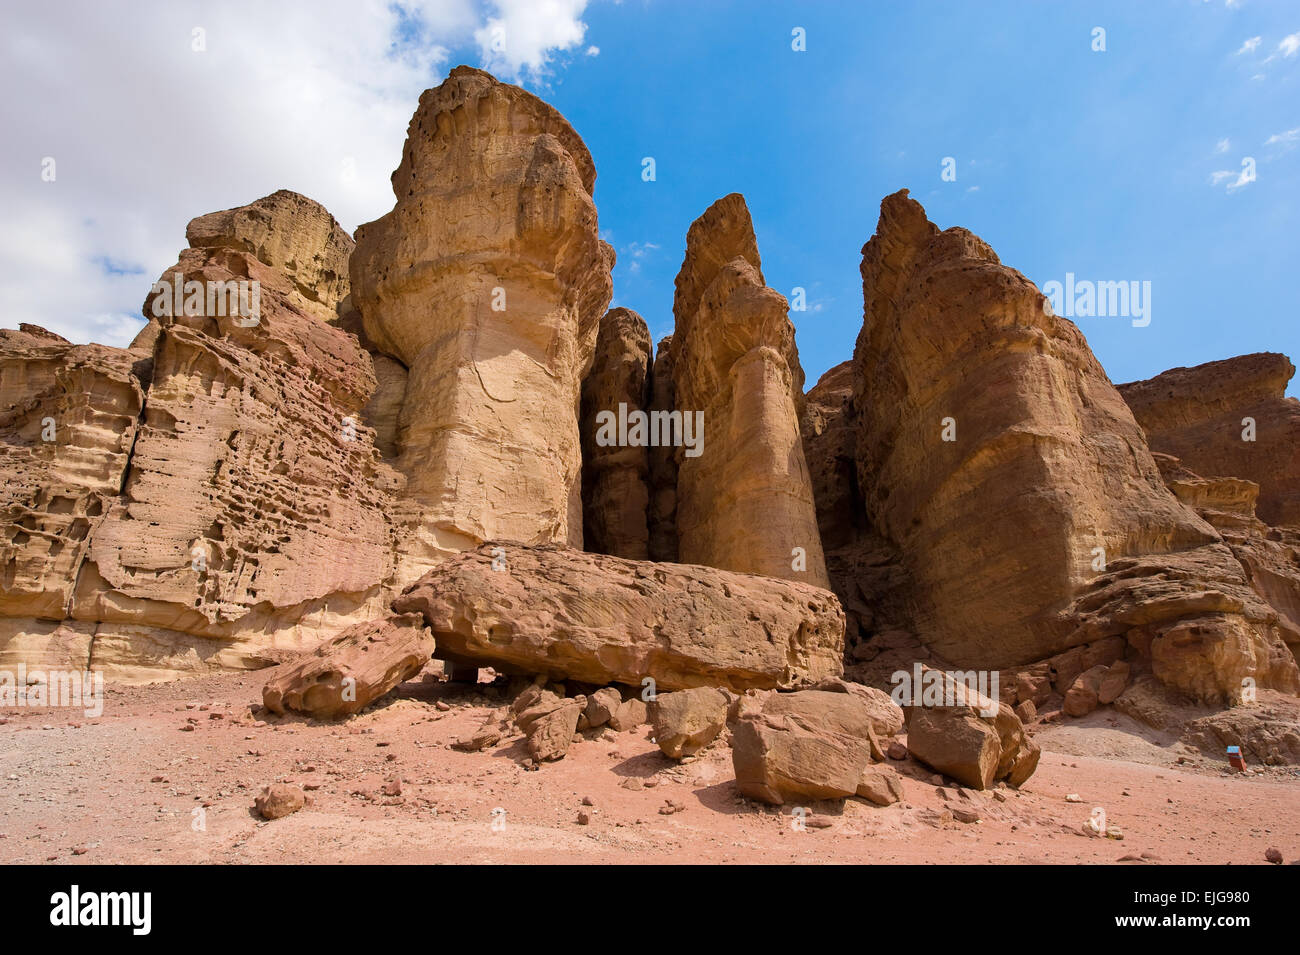 Solomon's pillars rock formation at Timna Park in the southern negev desert in Israel Stock Photo